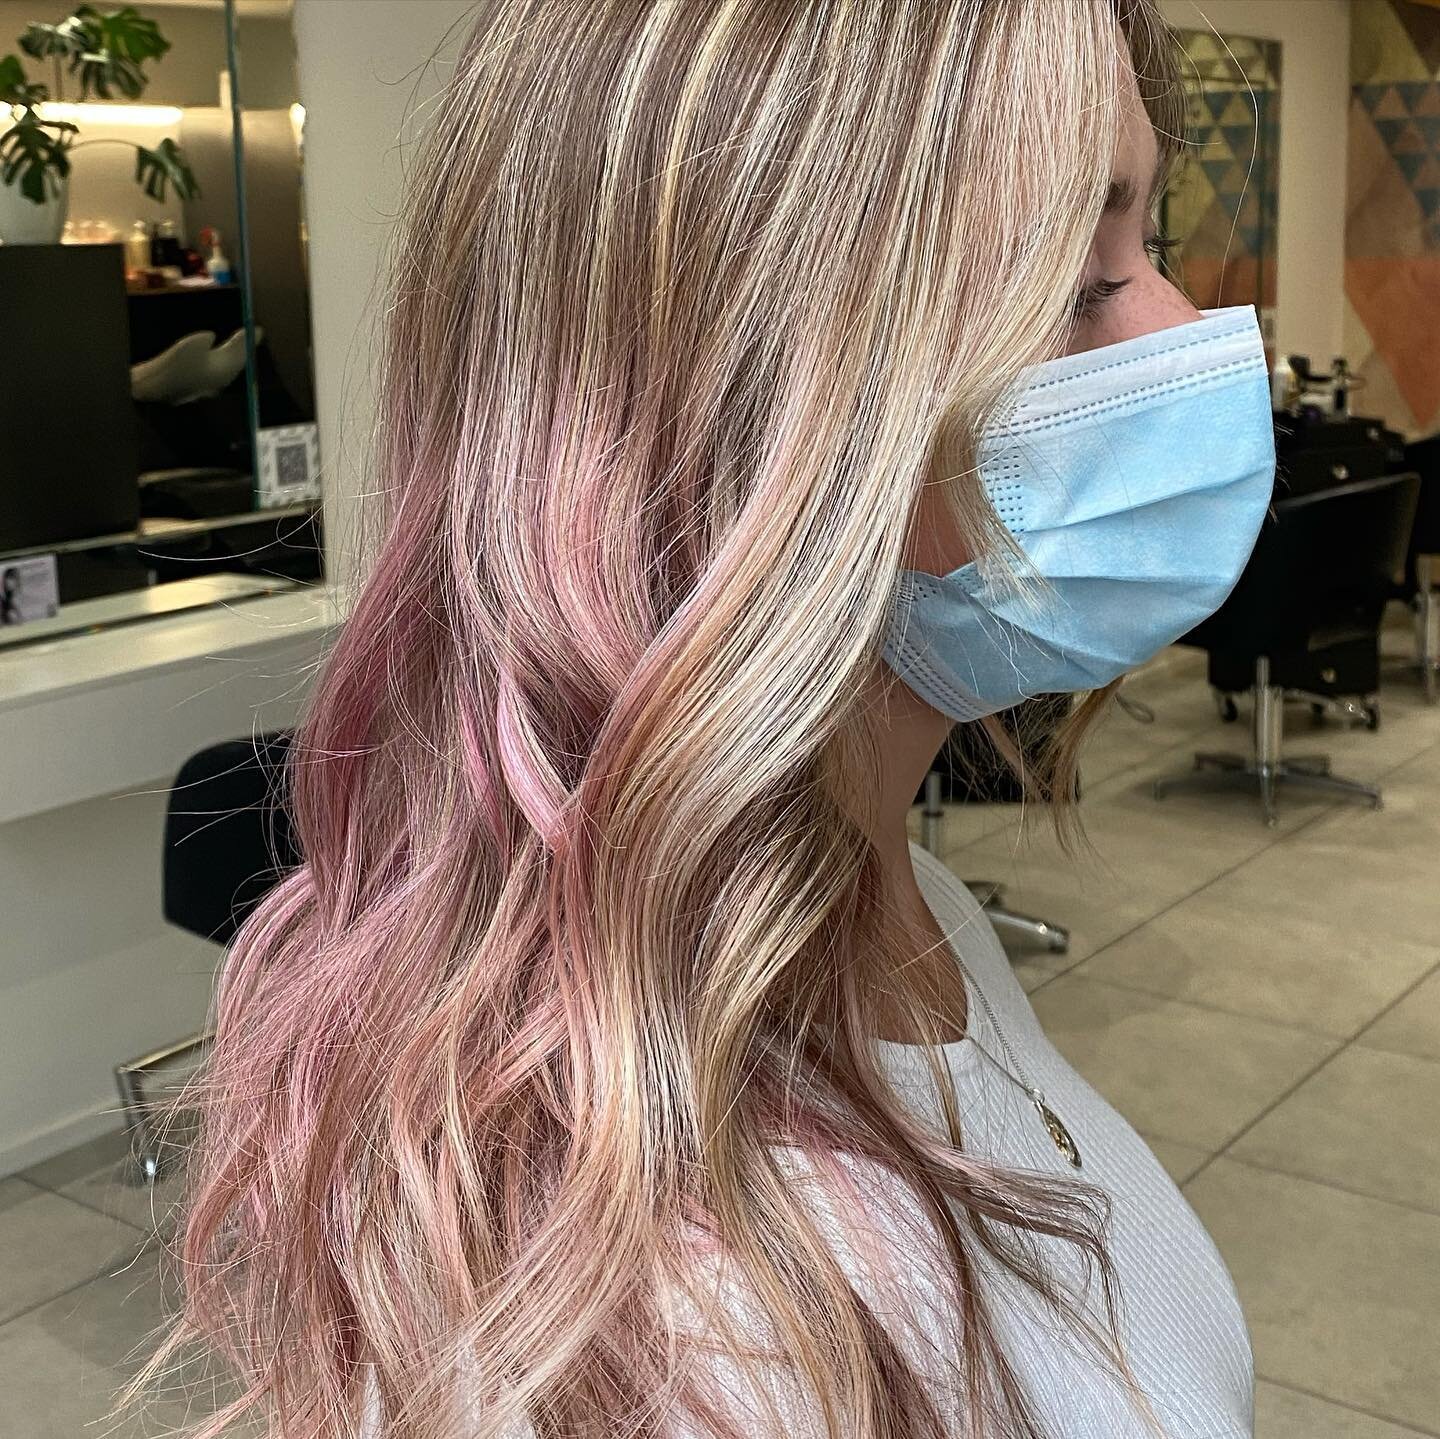 Check out the before ... we decided to keep the pink ... what do your think ?  We love 💕
.
#blondehair #pinkhair #lorealpronz #ghd #metaldetox #queenstownhairdresser #crewstylists #queenstown